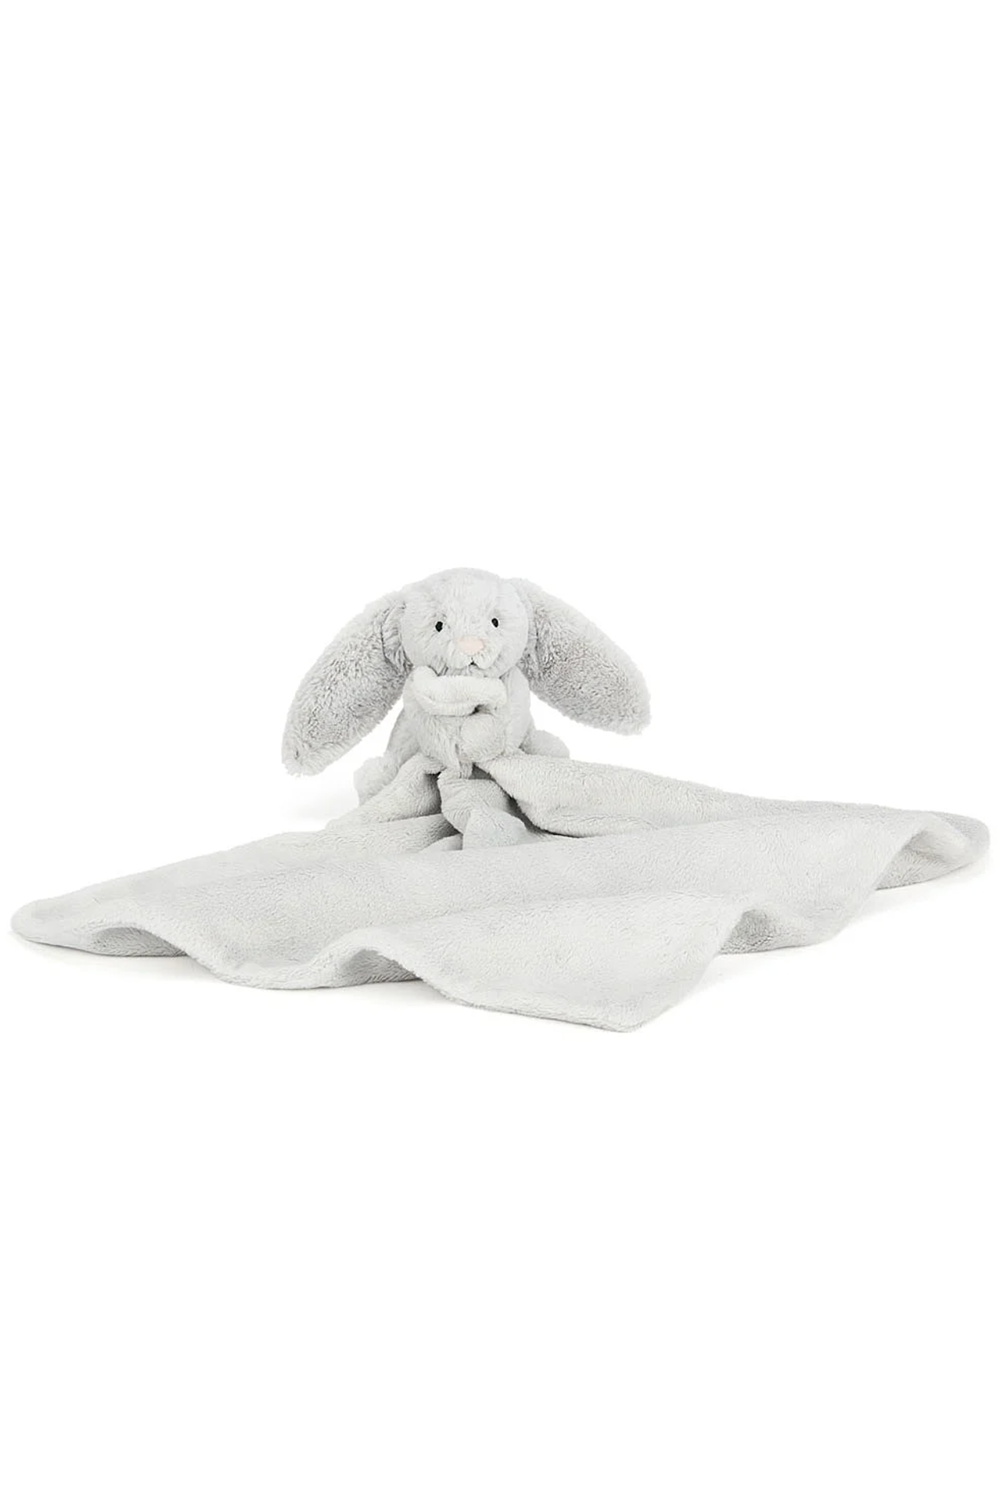 JELLYCAT Bashful Soother - Grey Bunny